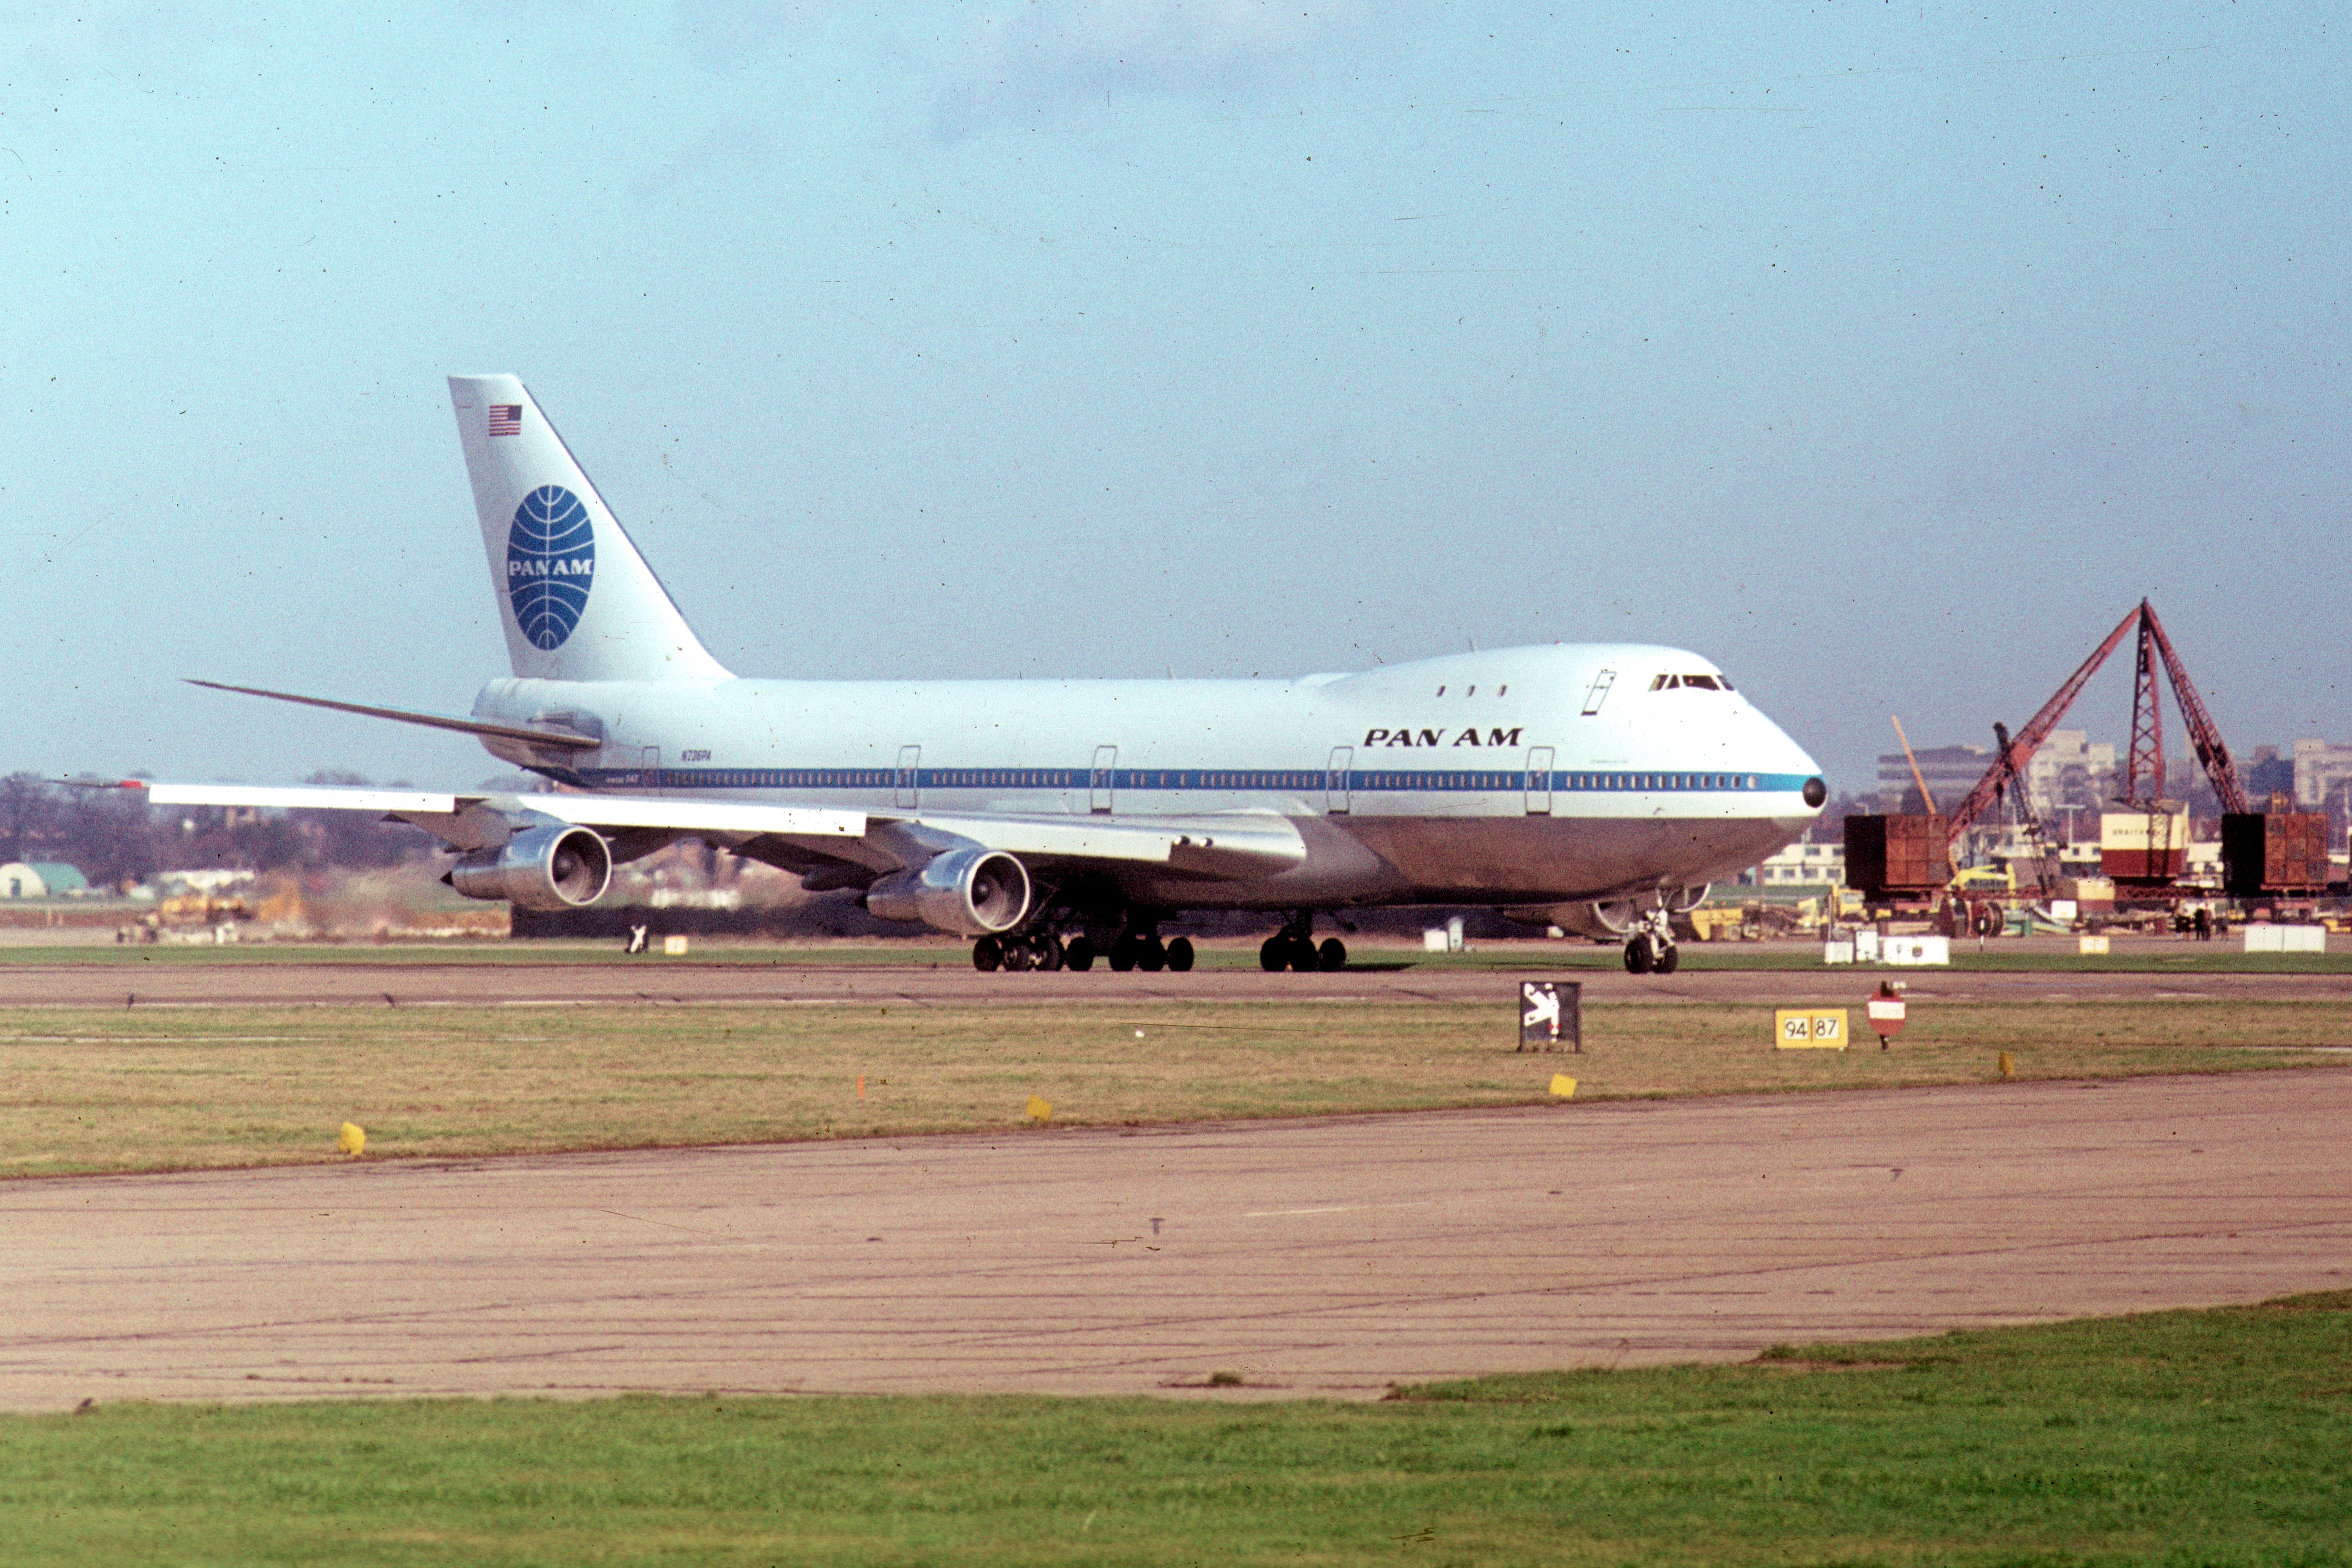 A Pan Am Boeing 747 on an airport apron.